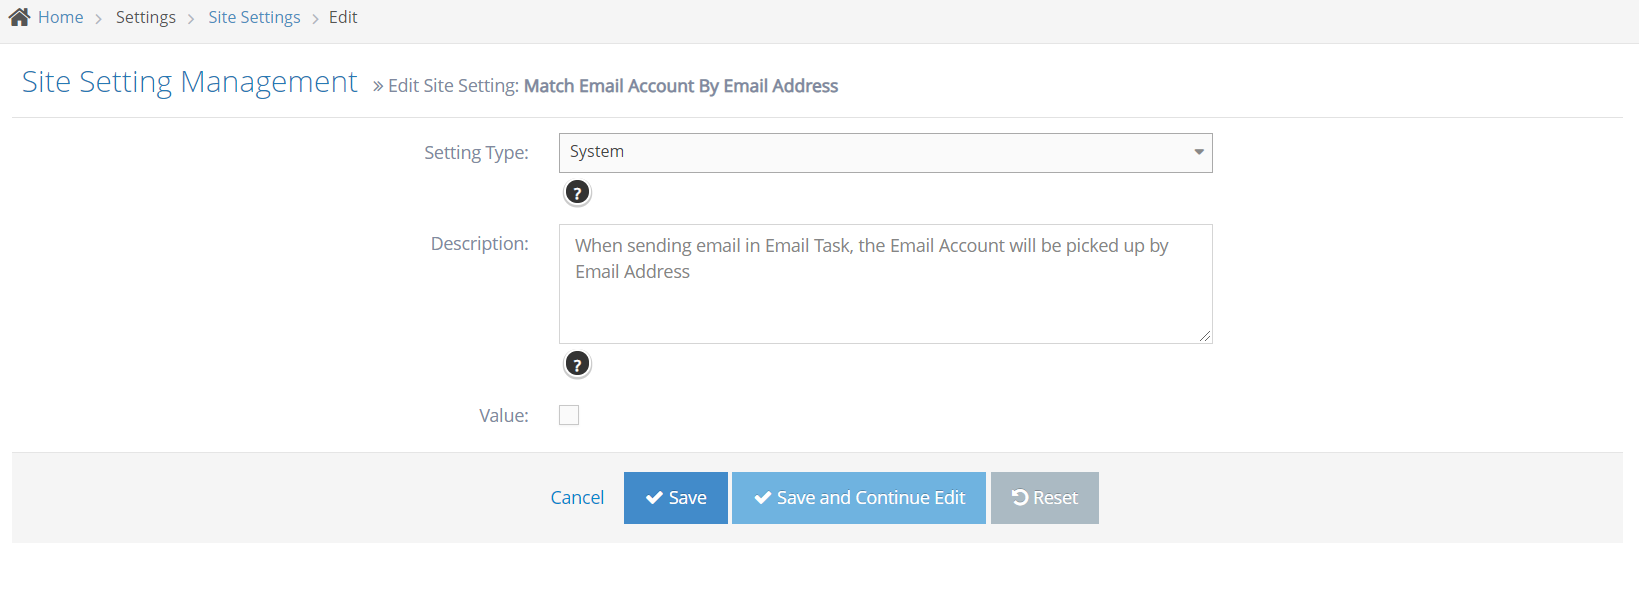 Managing Email Accounts